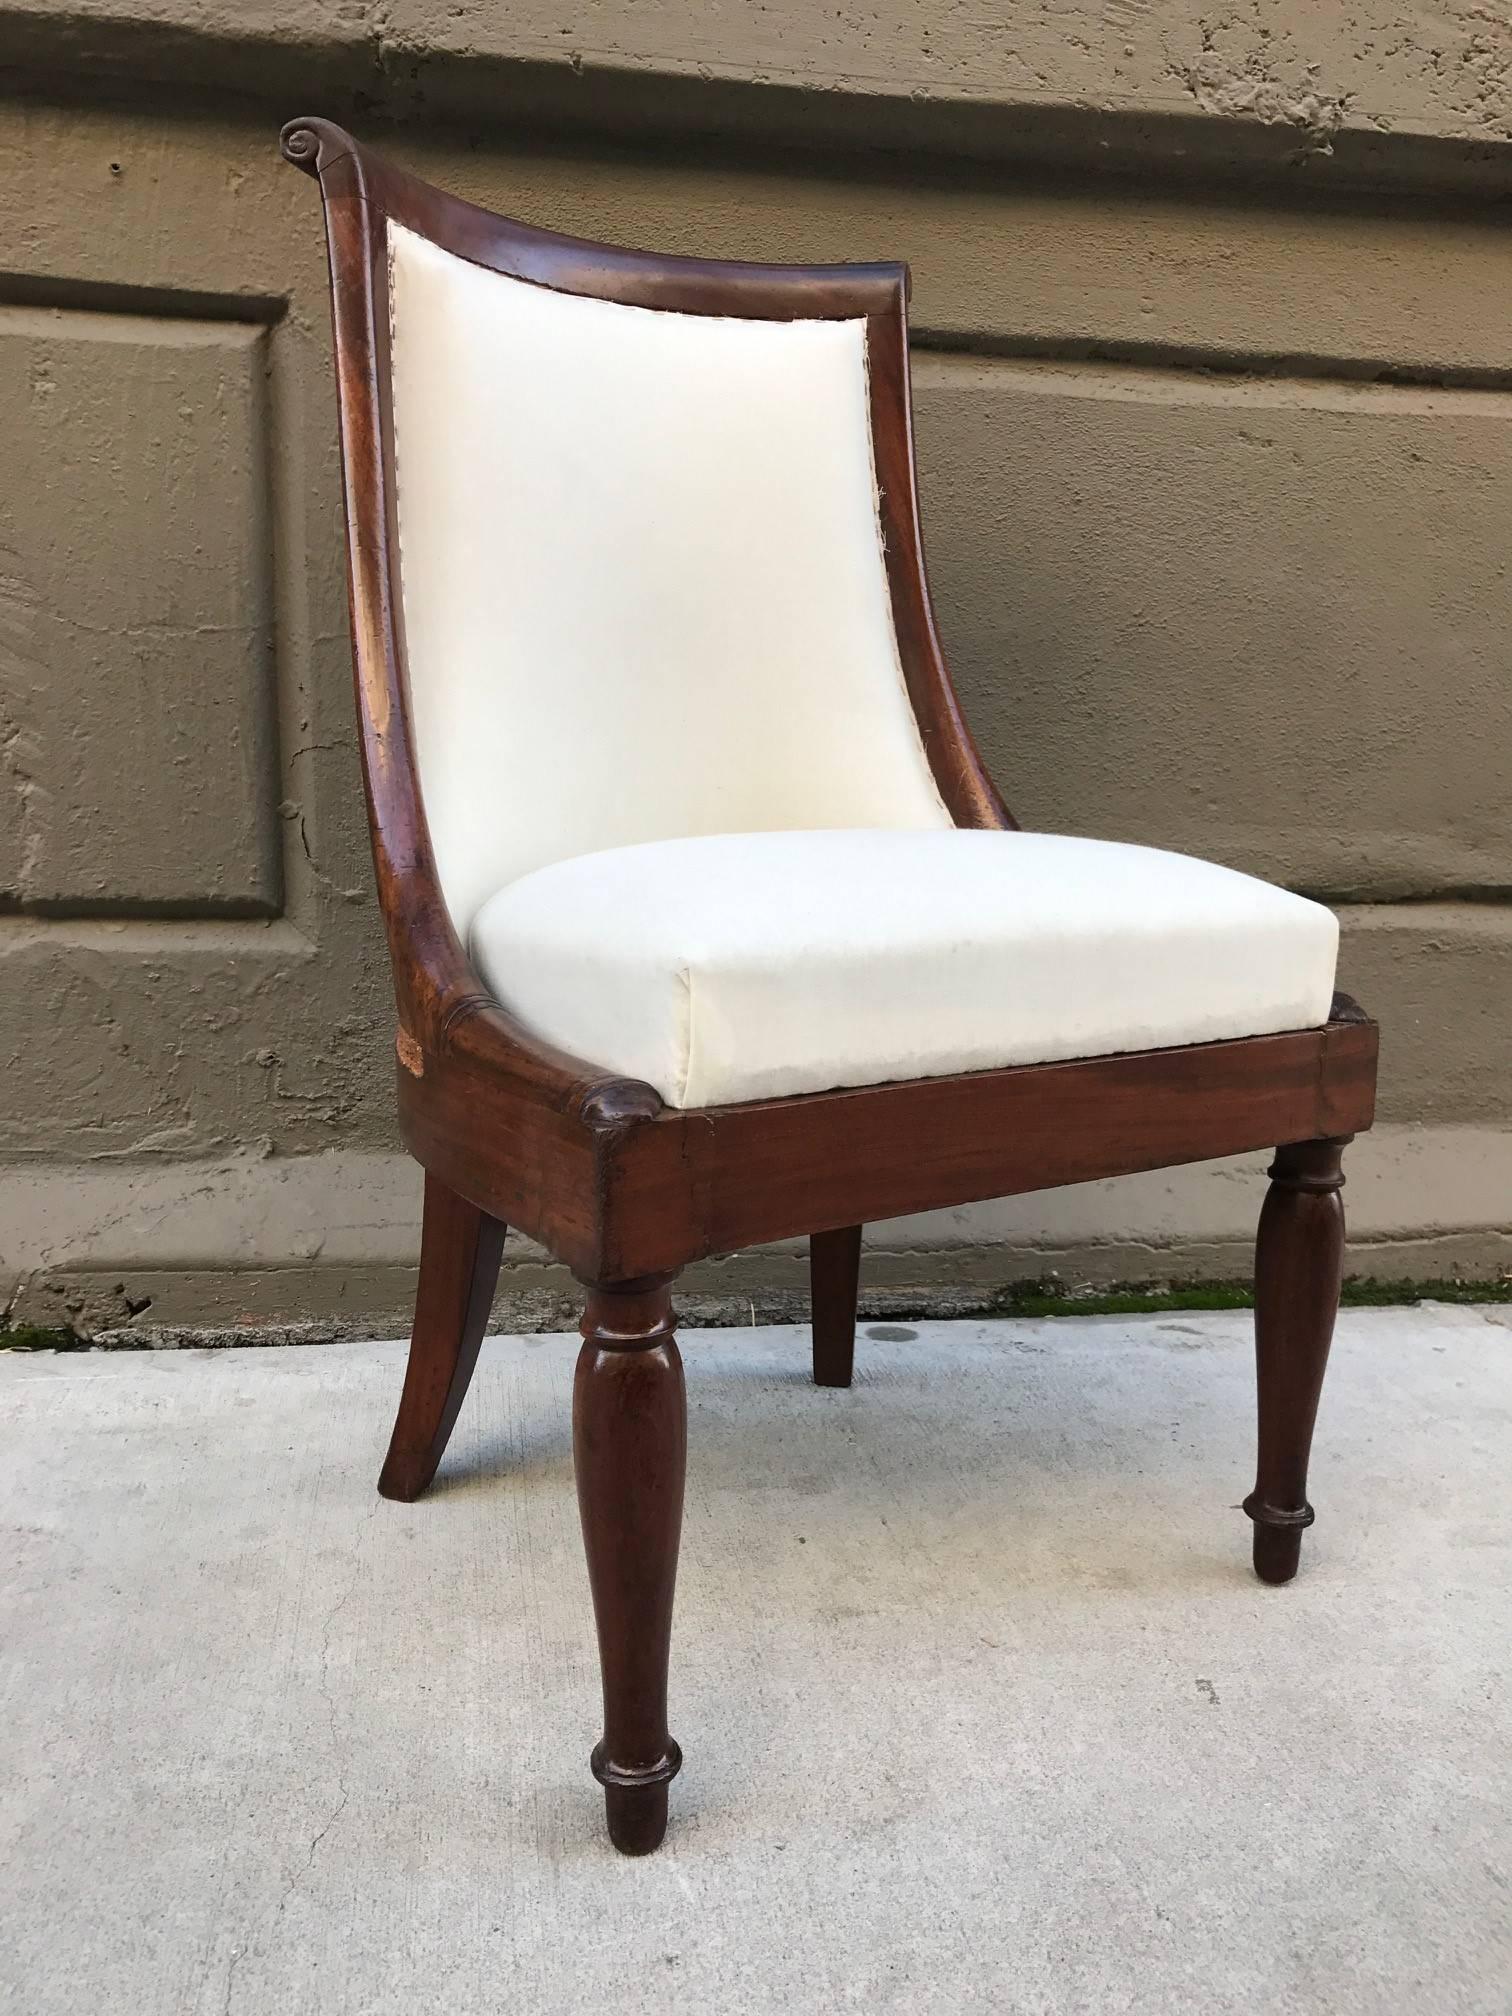 Set of four Regency style mahogany chairs. Chairs are solid mahogany, has a curved back and muslin upholstery.